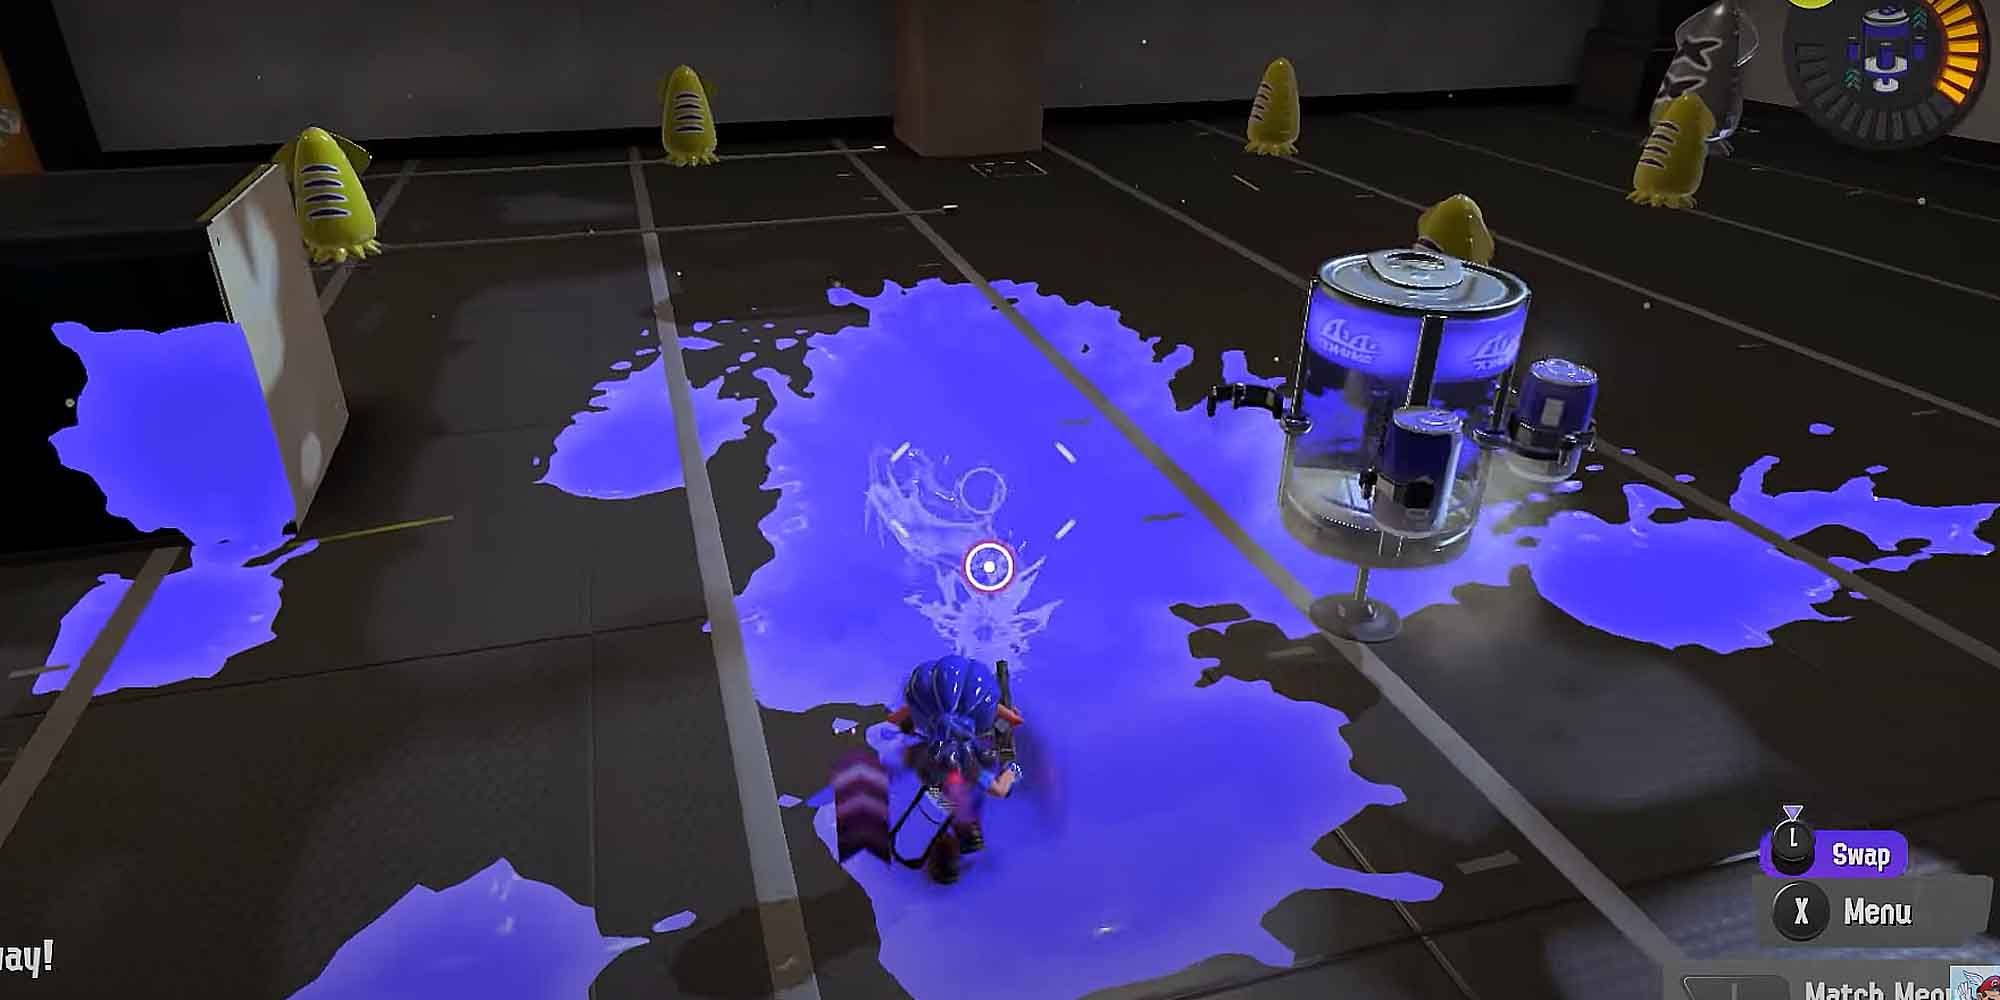 The Tacticooler provides energy drinks in Splatoon 3